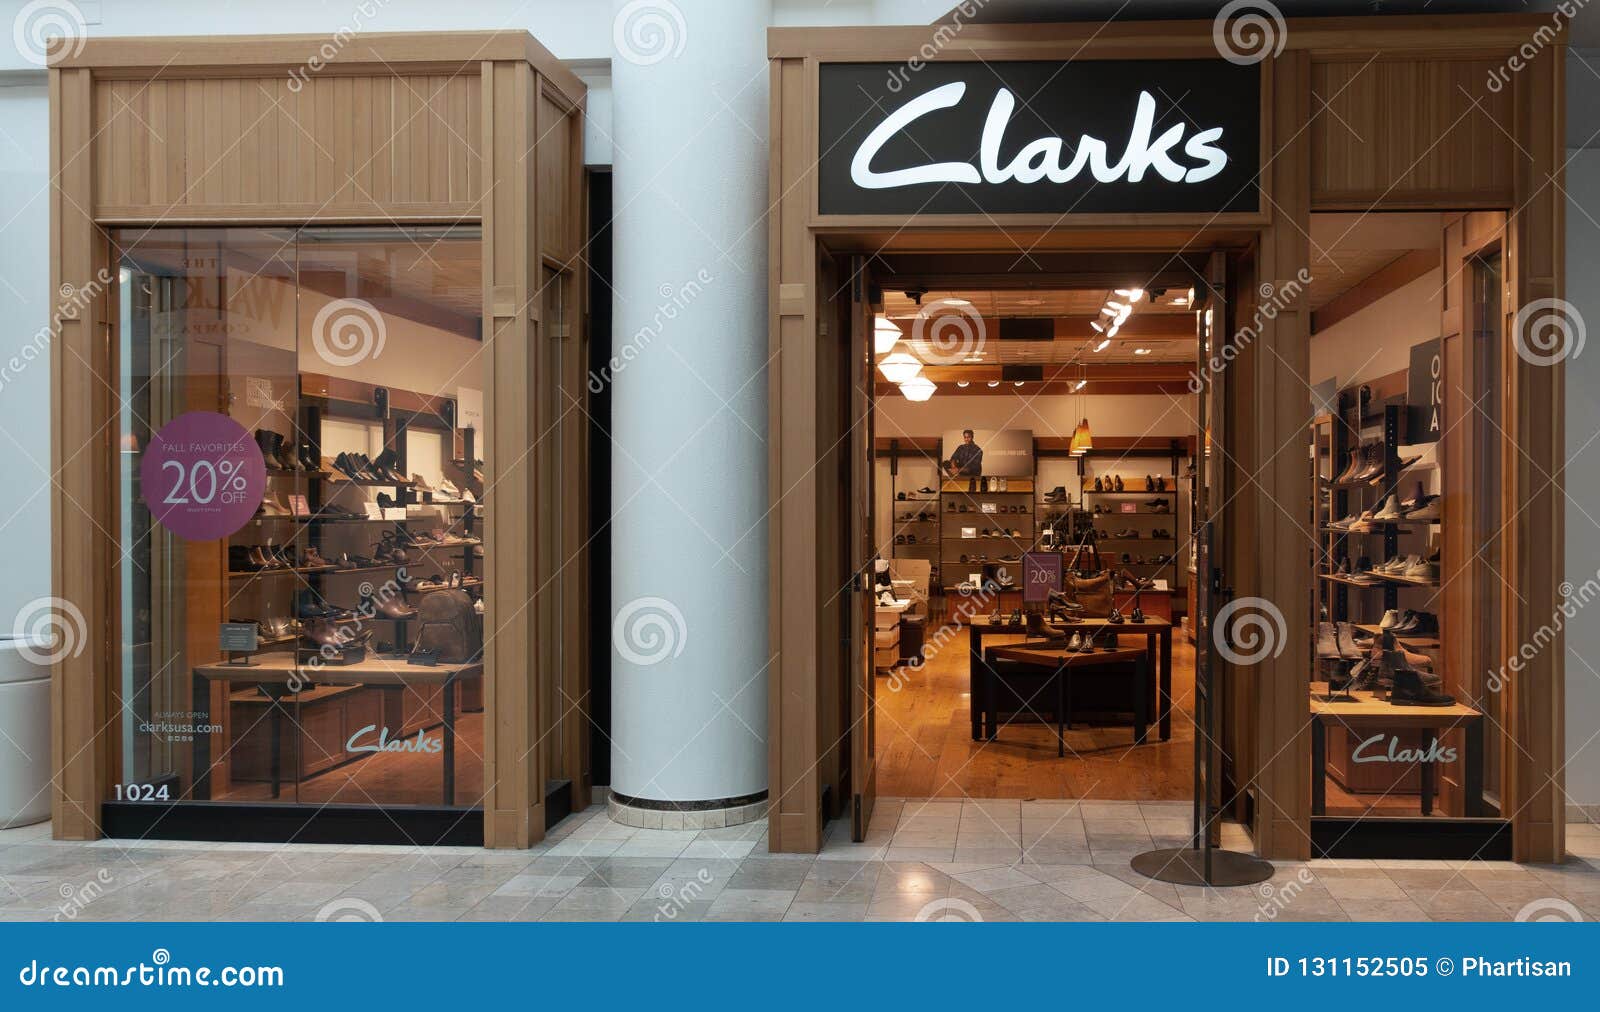 clarks shoes outlet miami